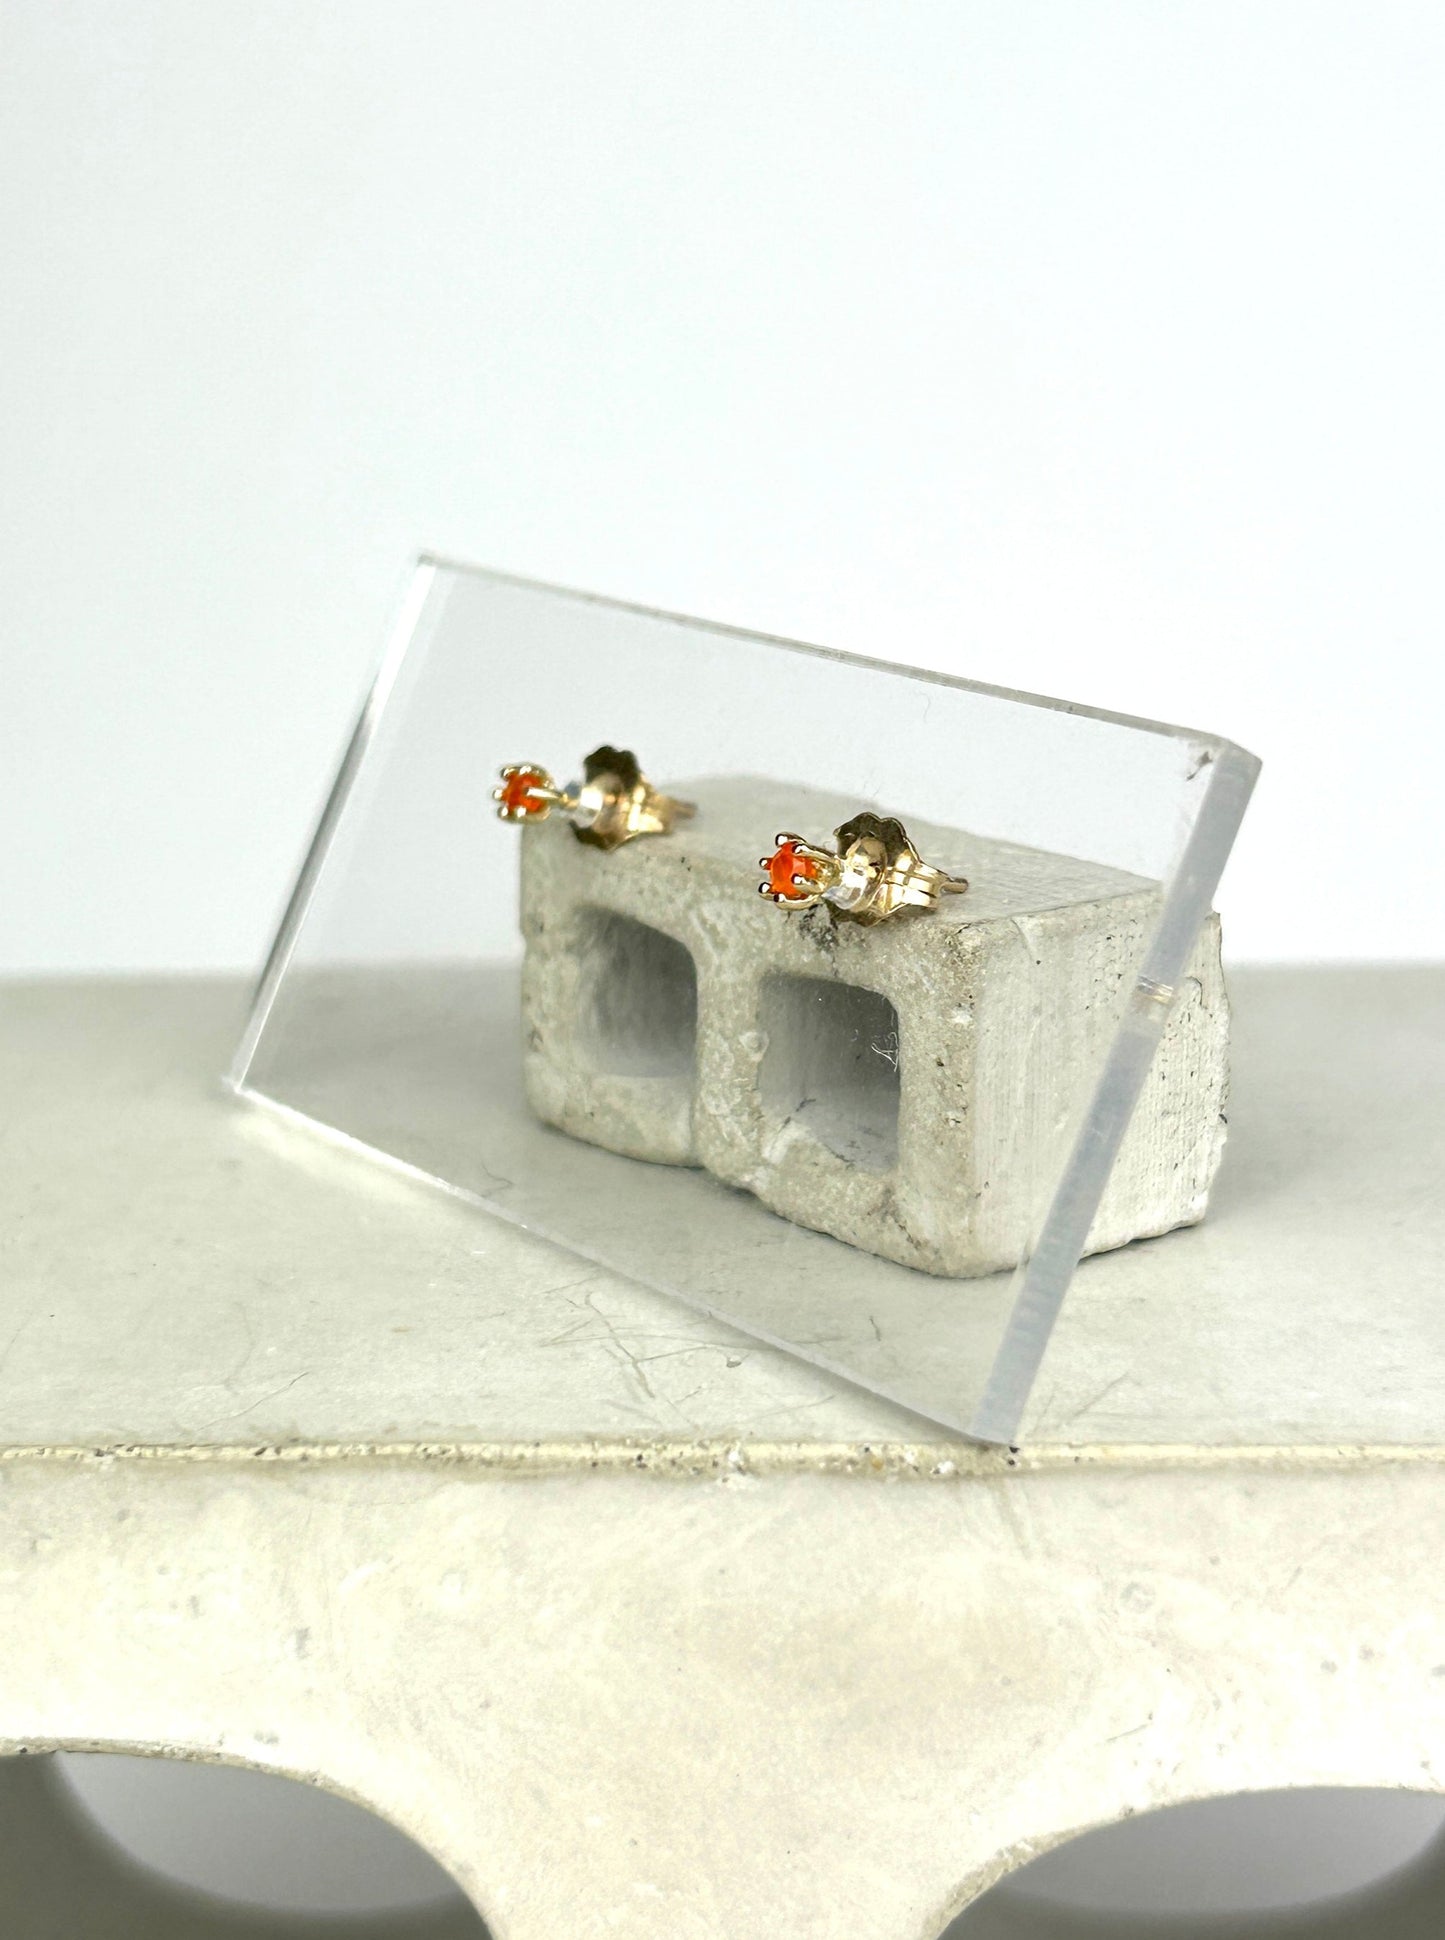 Side view 14k gold earrings with bright orange carnelians that resemble tulips are displayed on a clear acrylic card held up by a miniature cinderblock infront of a white background.